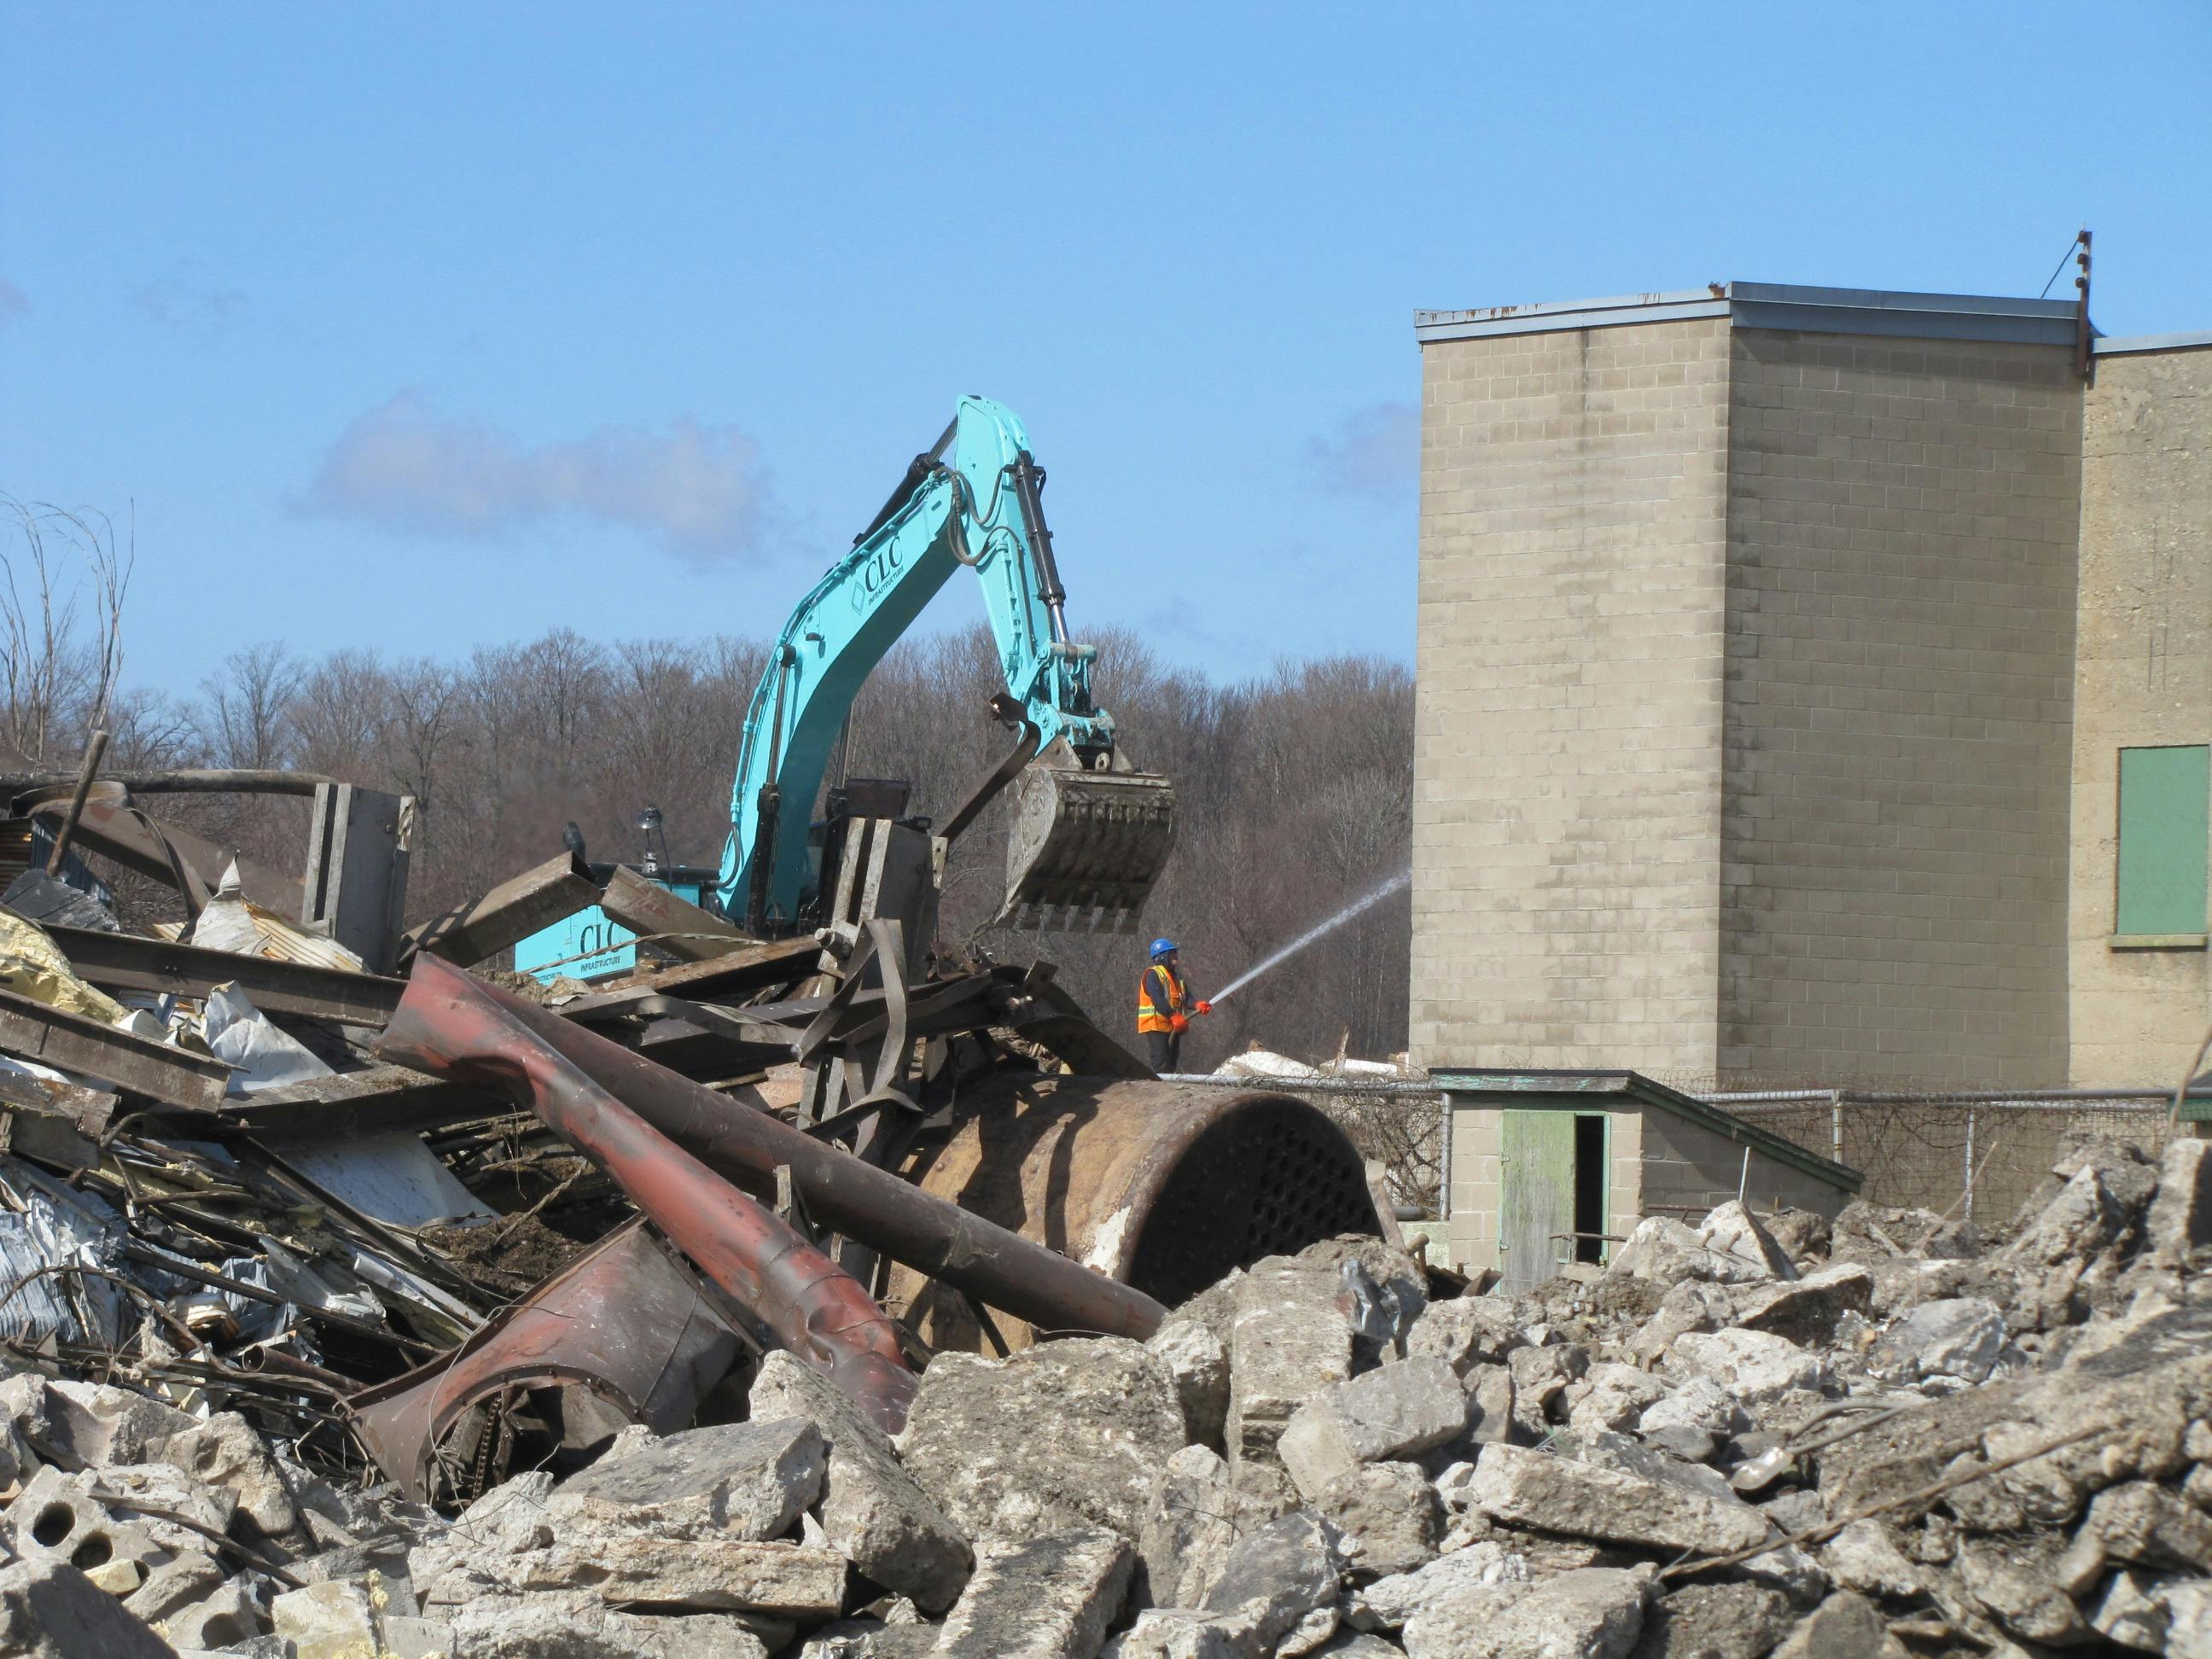 Demolition of Bogdon and Gross - March 12, 2021